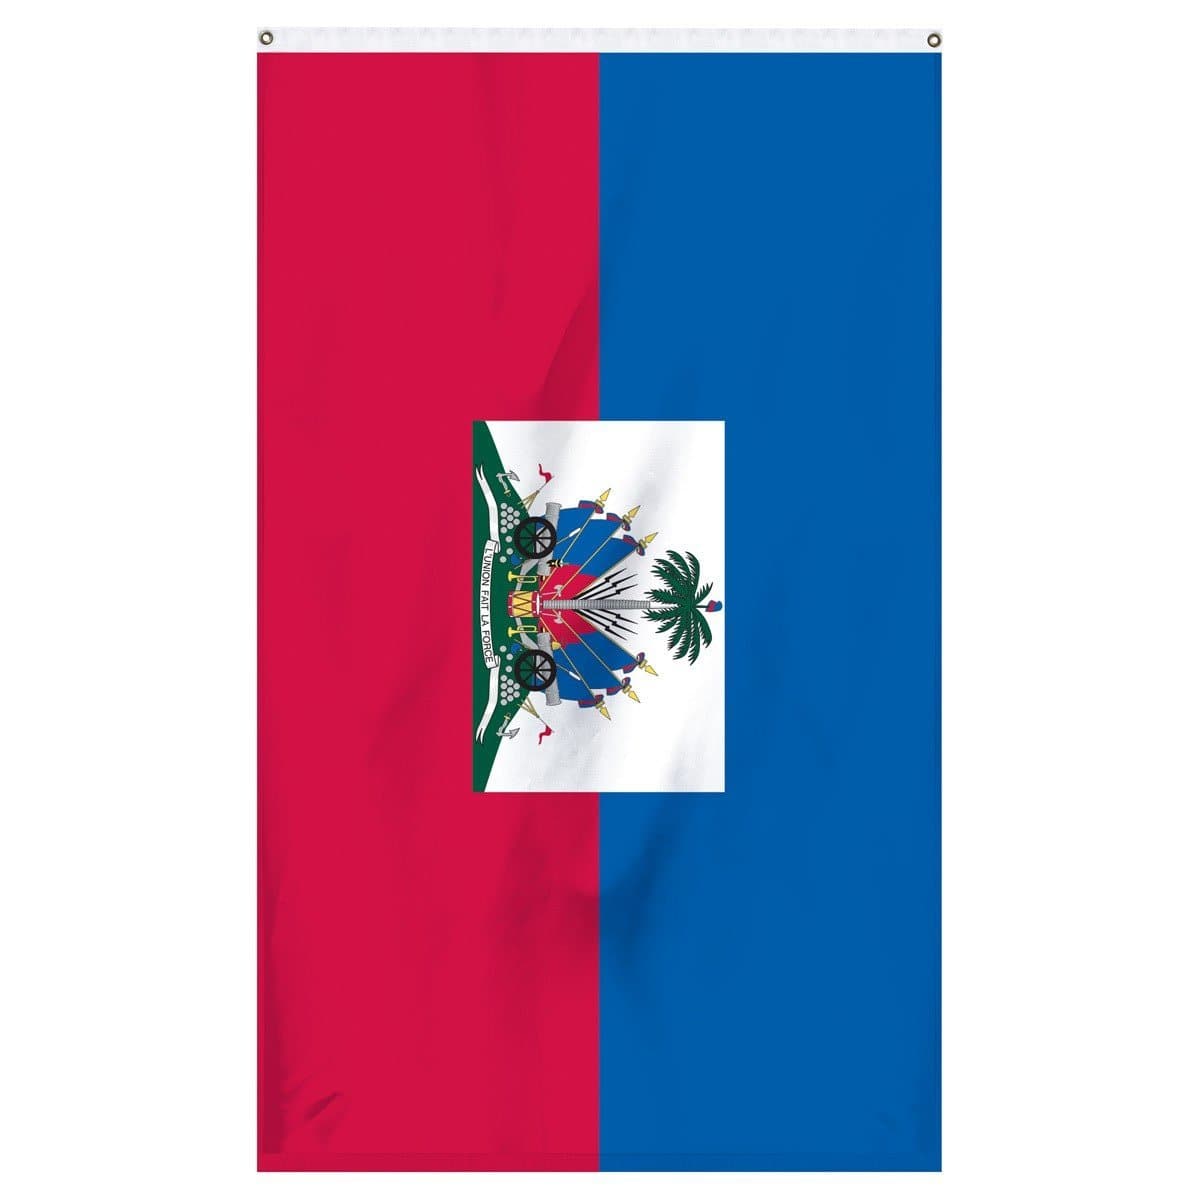 The national flag of Haiti for sale to buy online to fly on a flagpole